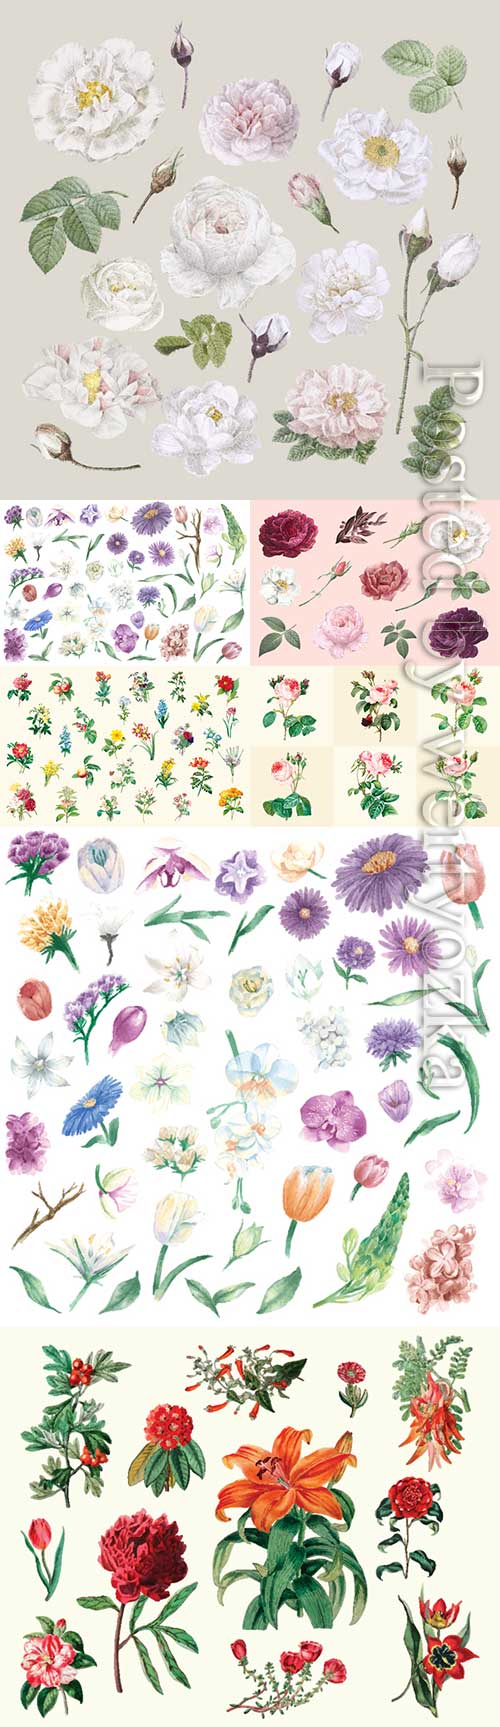 Drawn vector different flowers